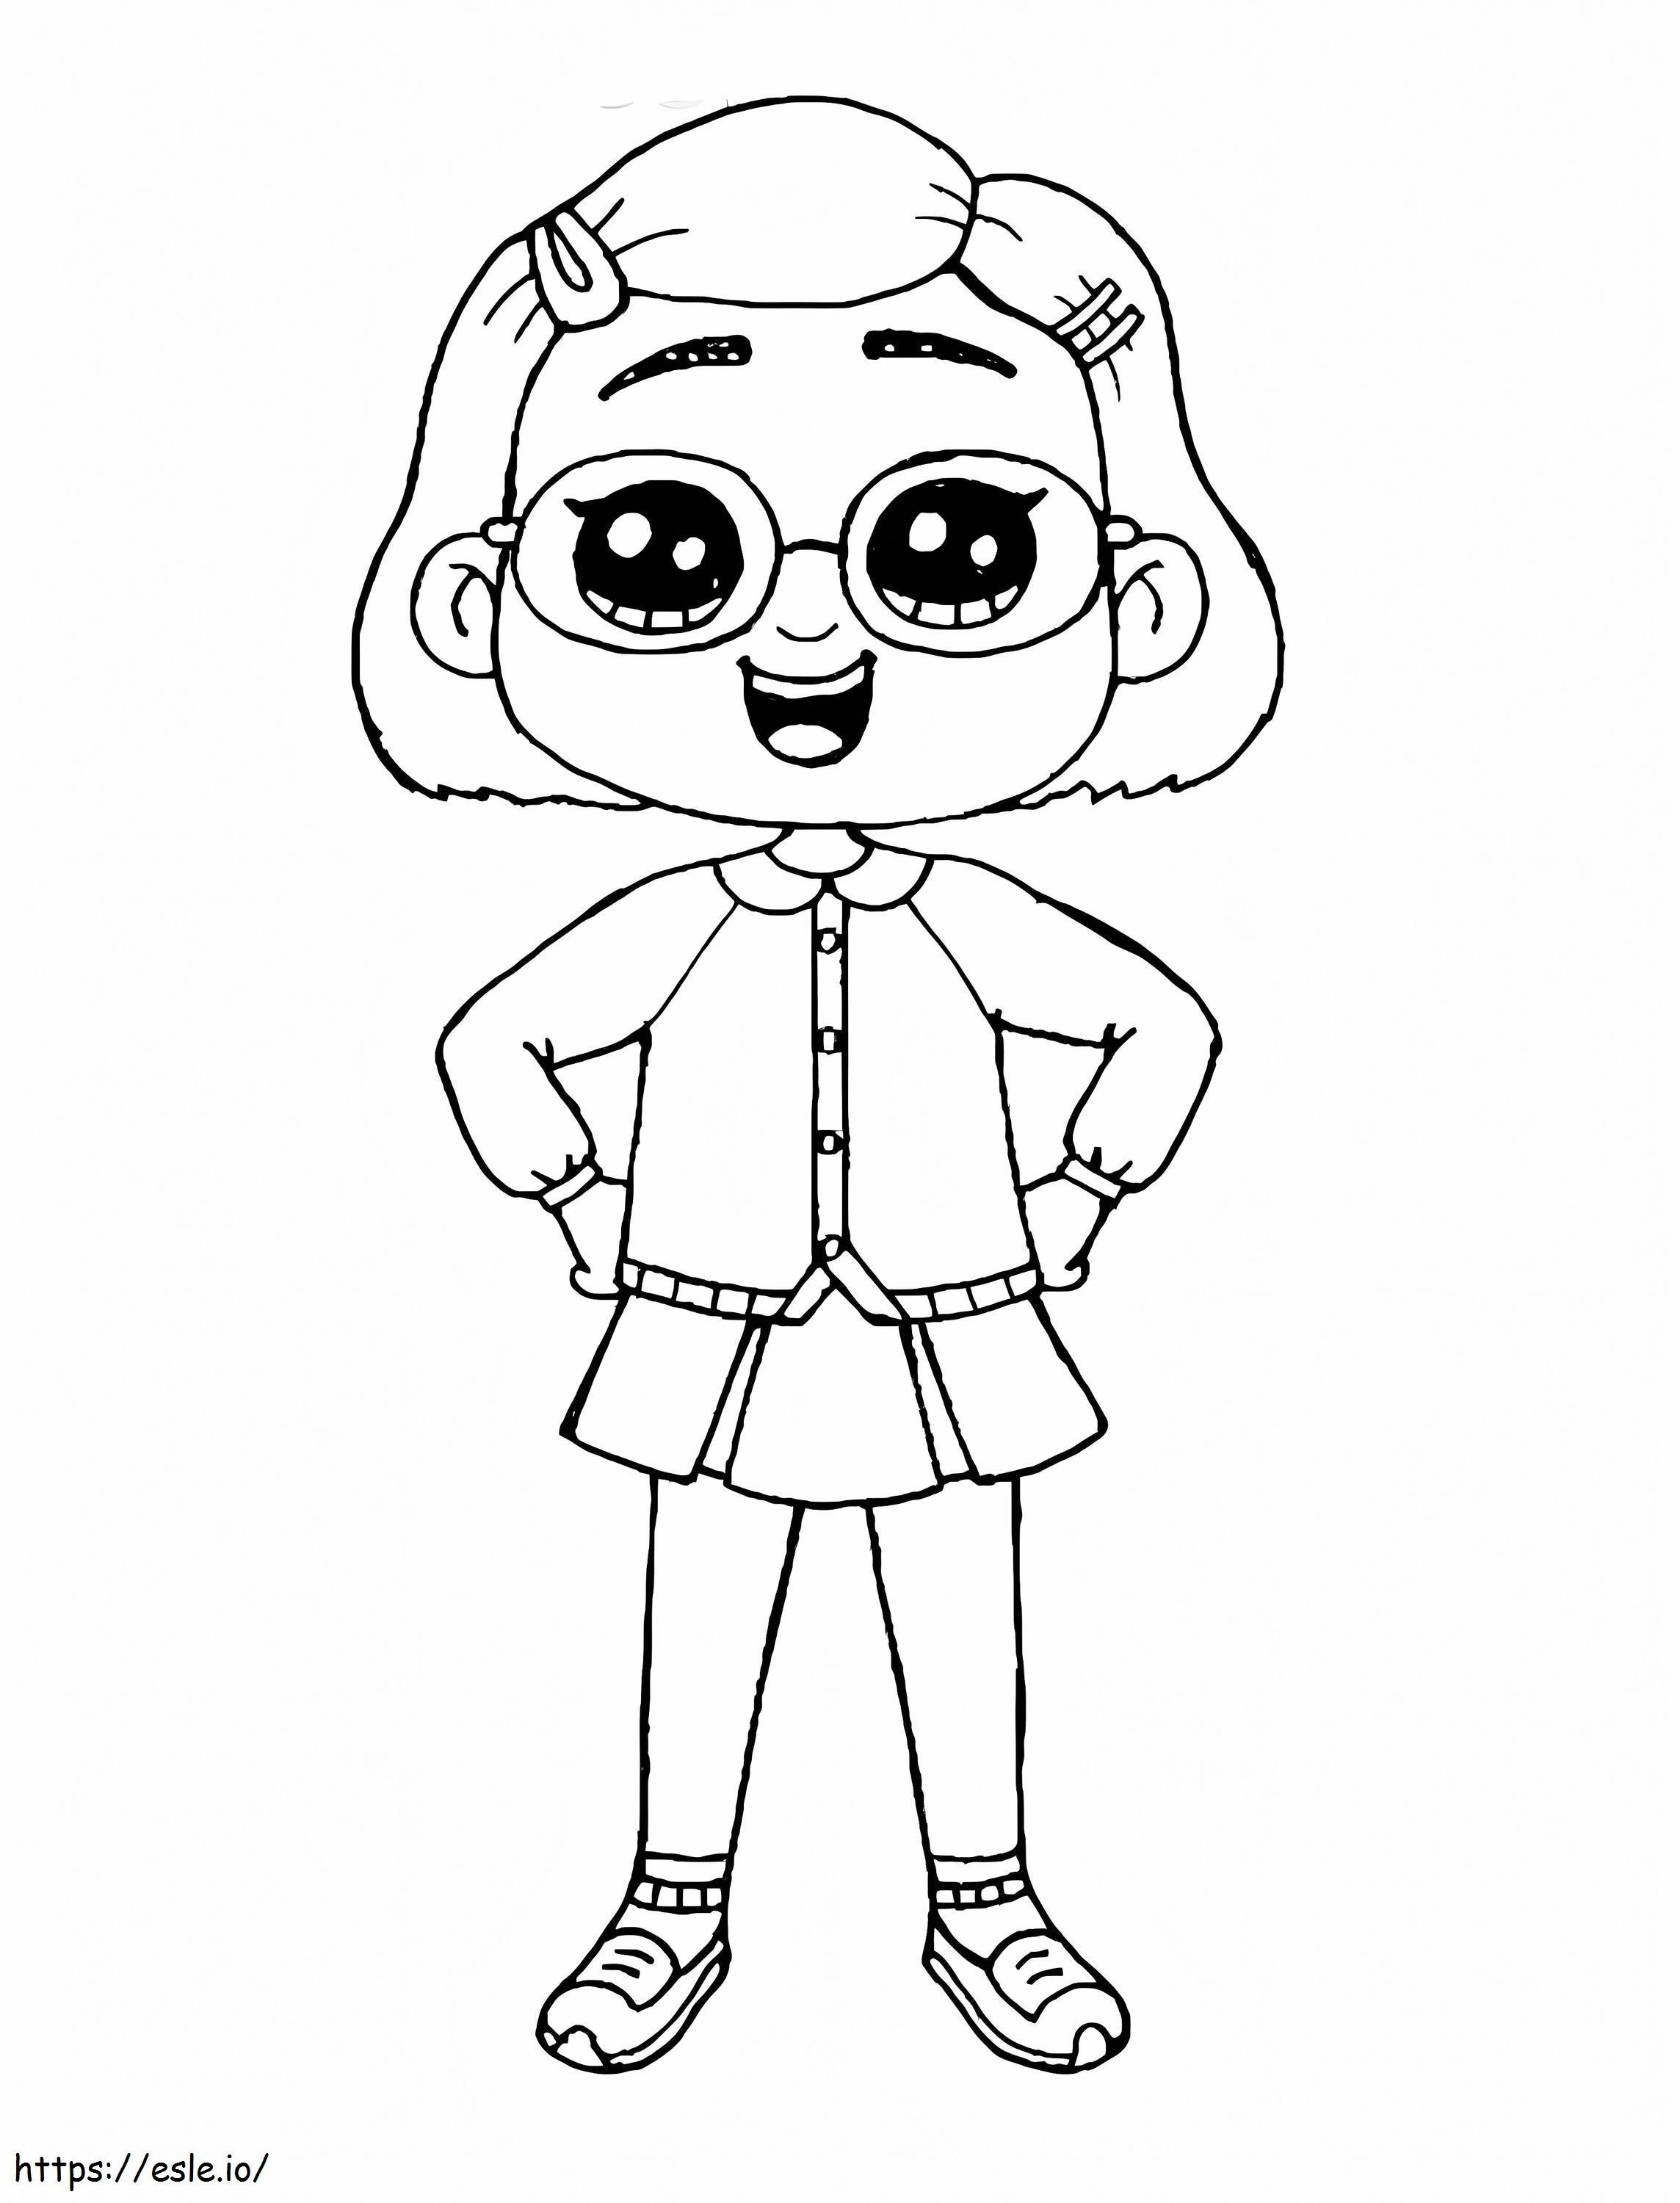 Adorable Mei Lee coloring page